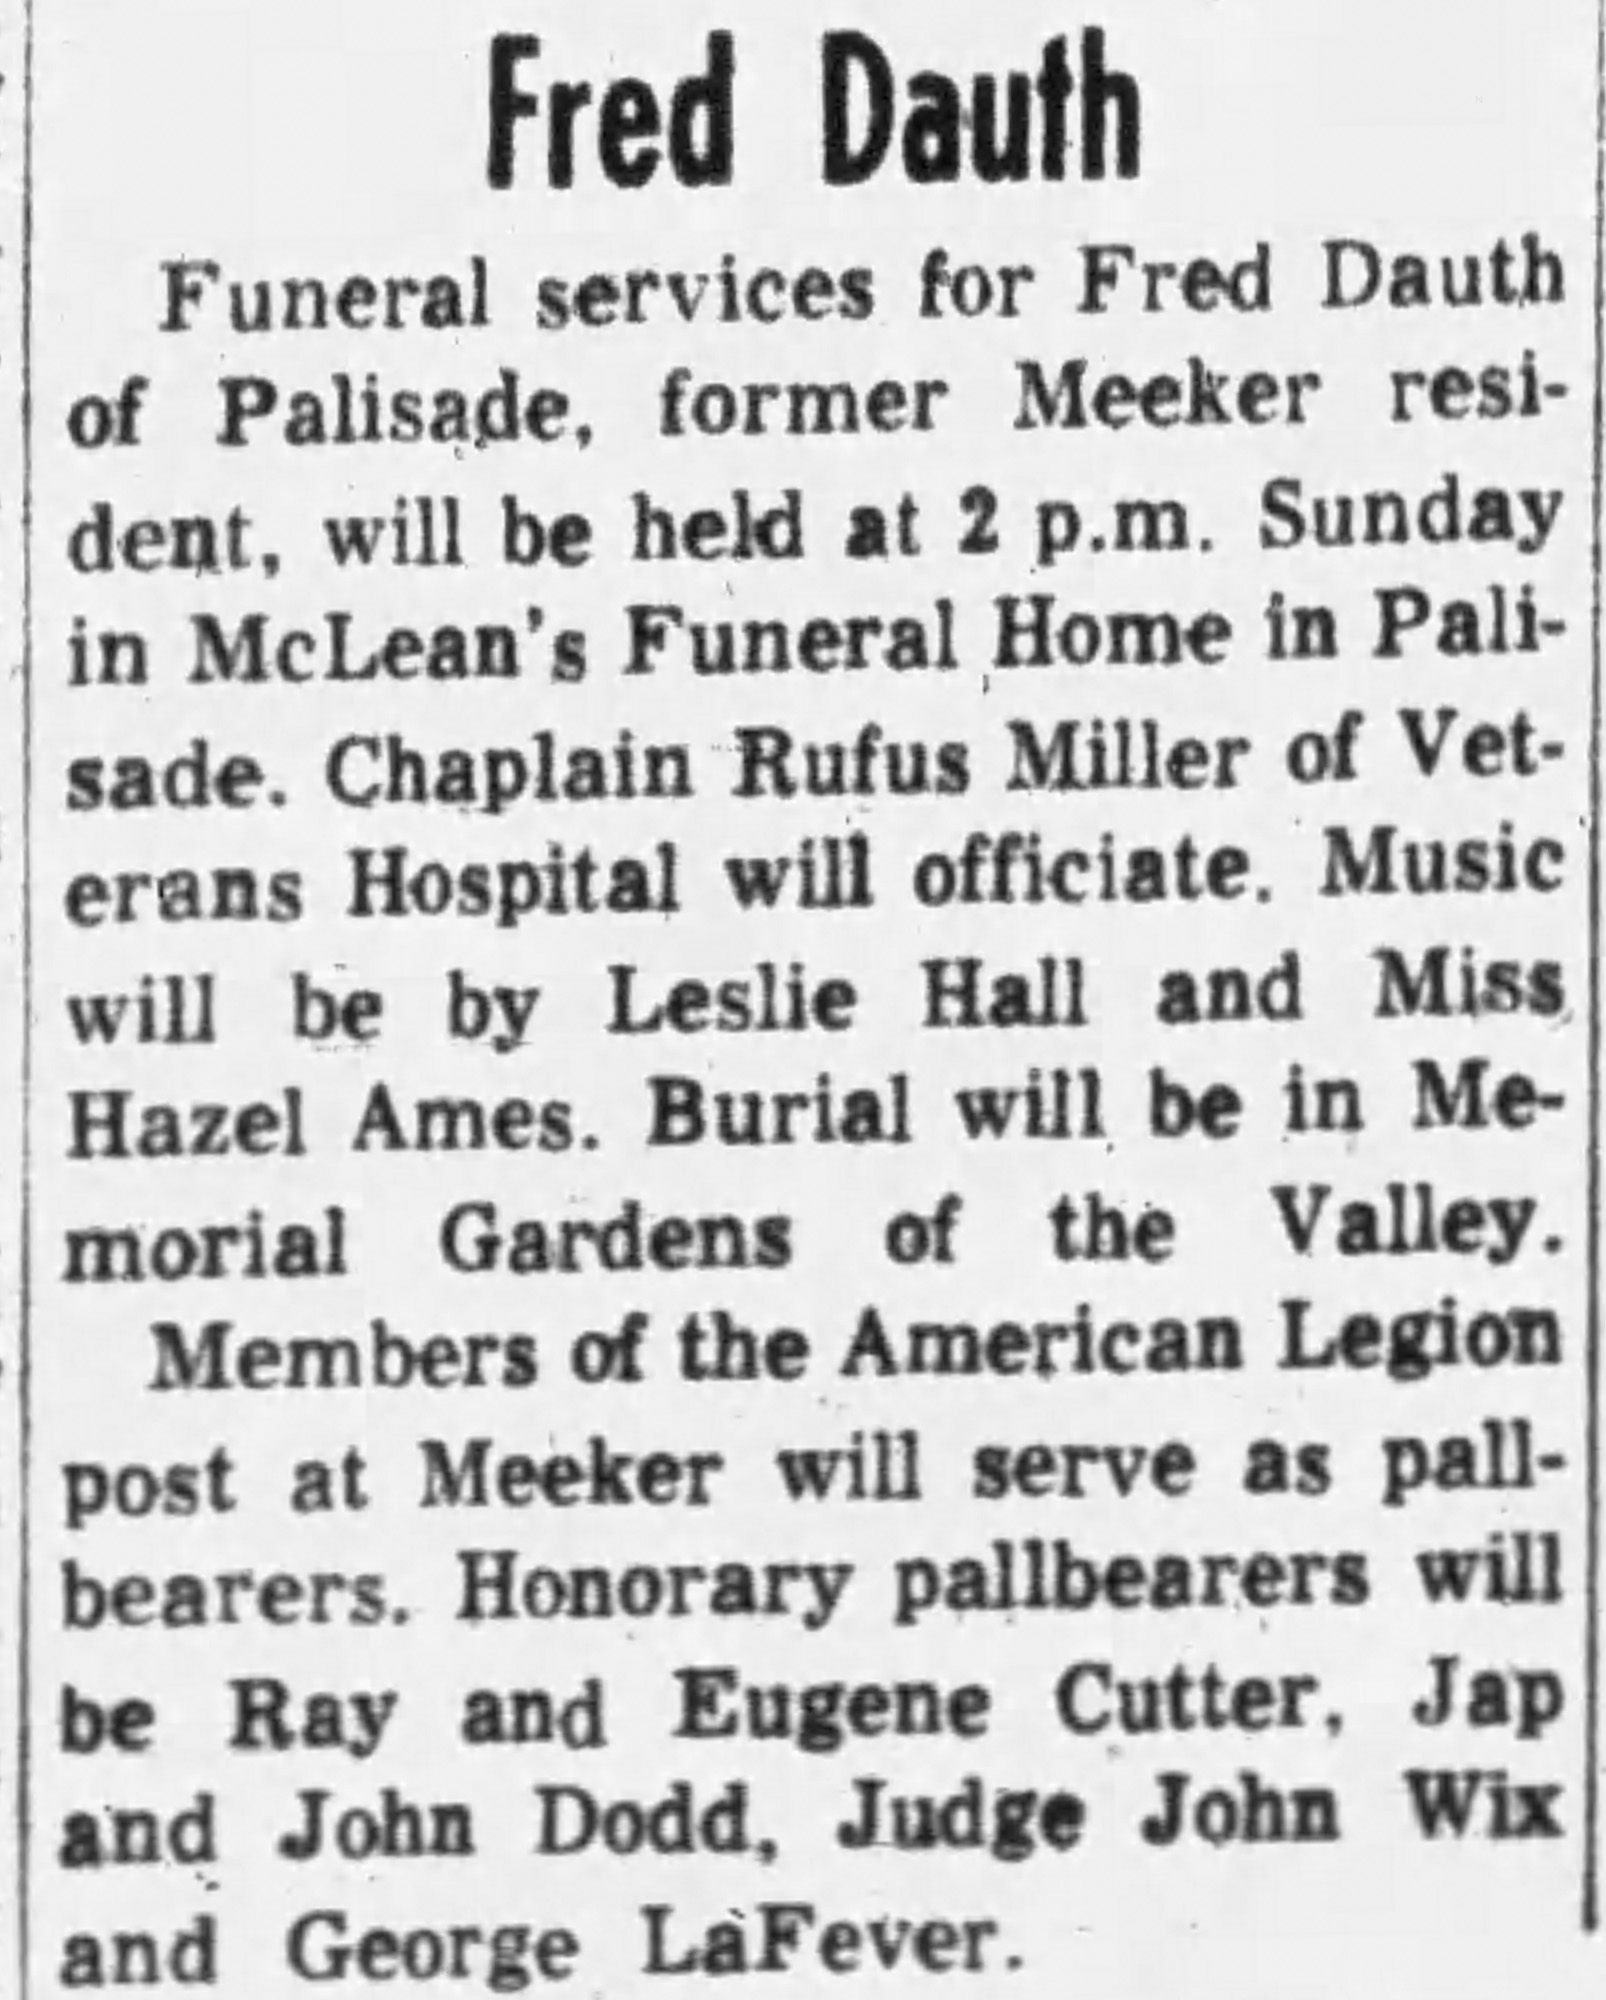 Dauth Family Archive - 1959-11-21 - The Daily Sentinel - Fred Dauth Obituary